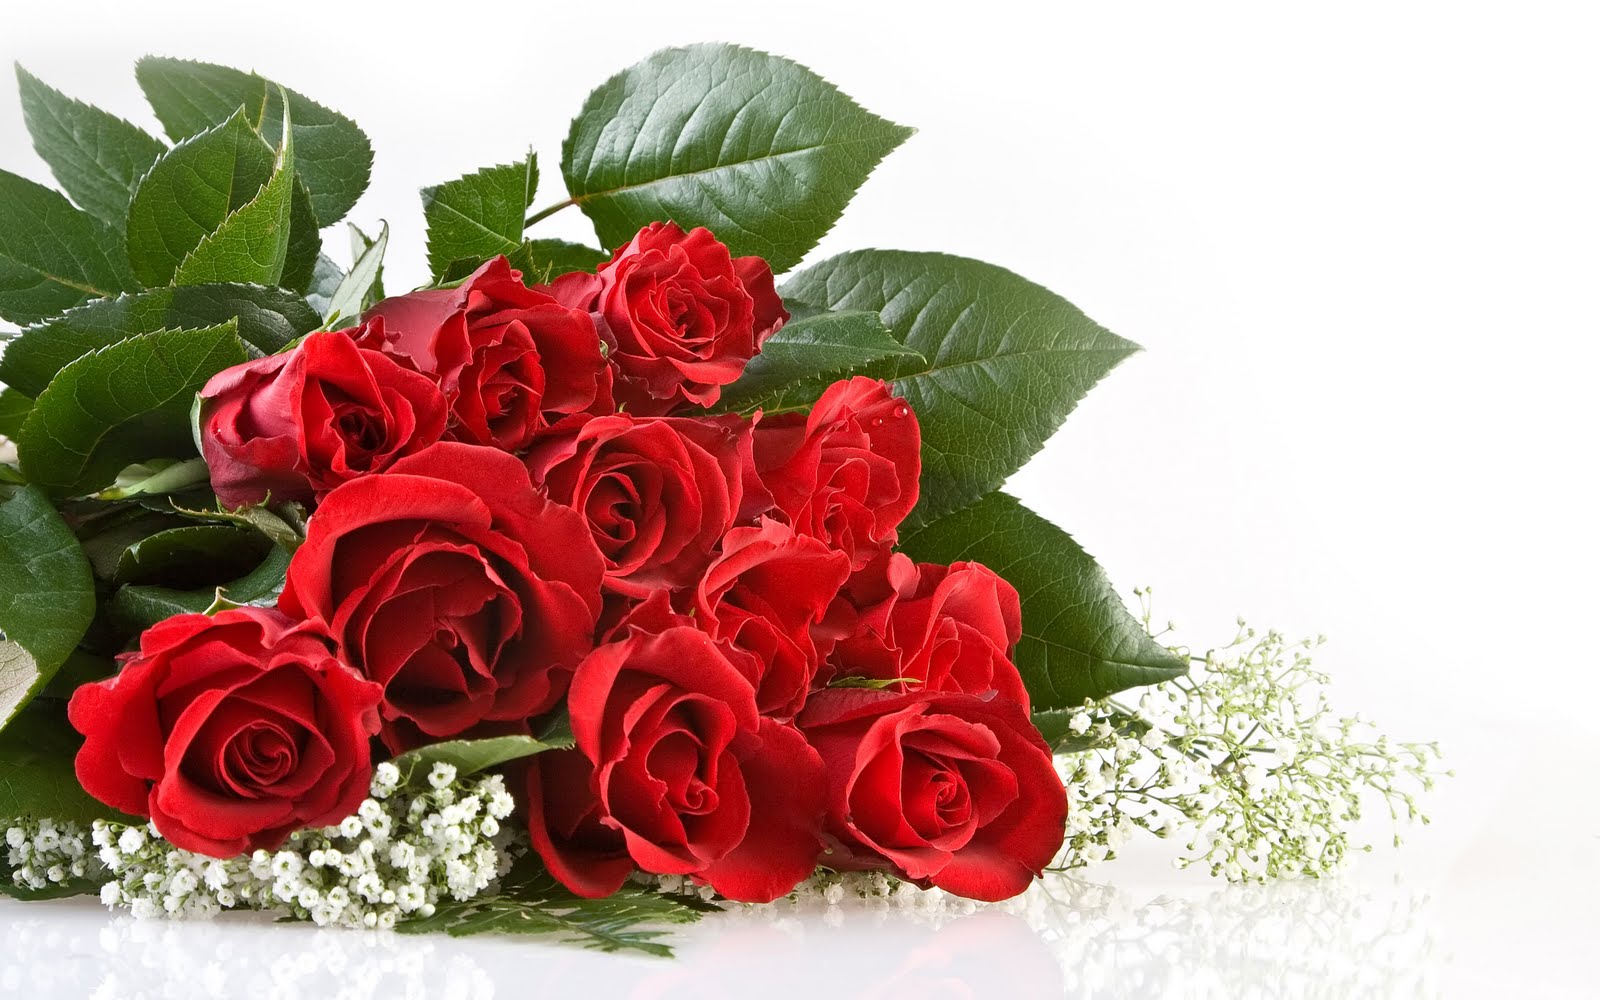  red  roses on white background, download photo, wallpapers for desktop